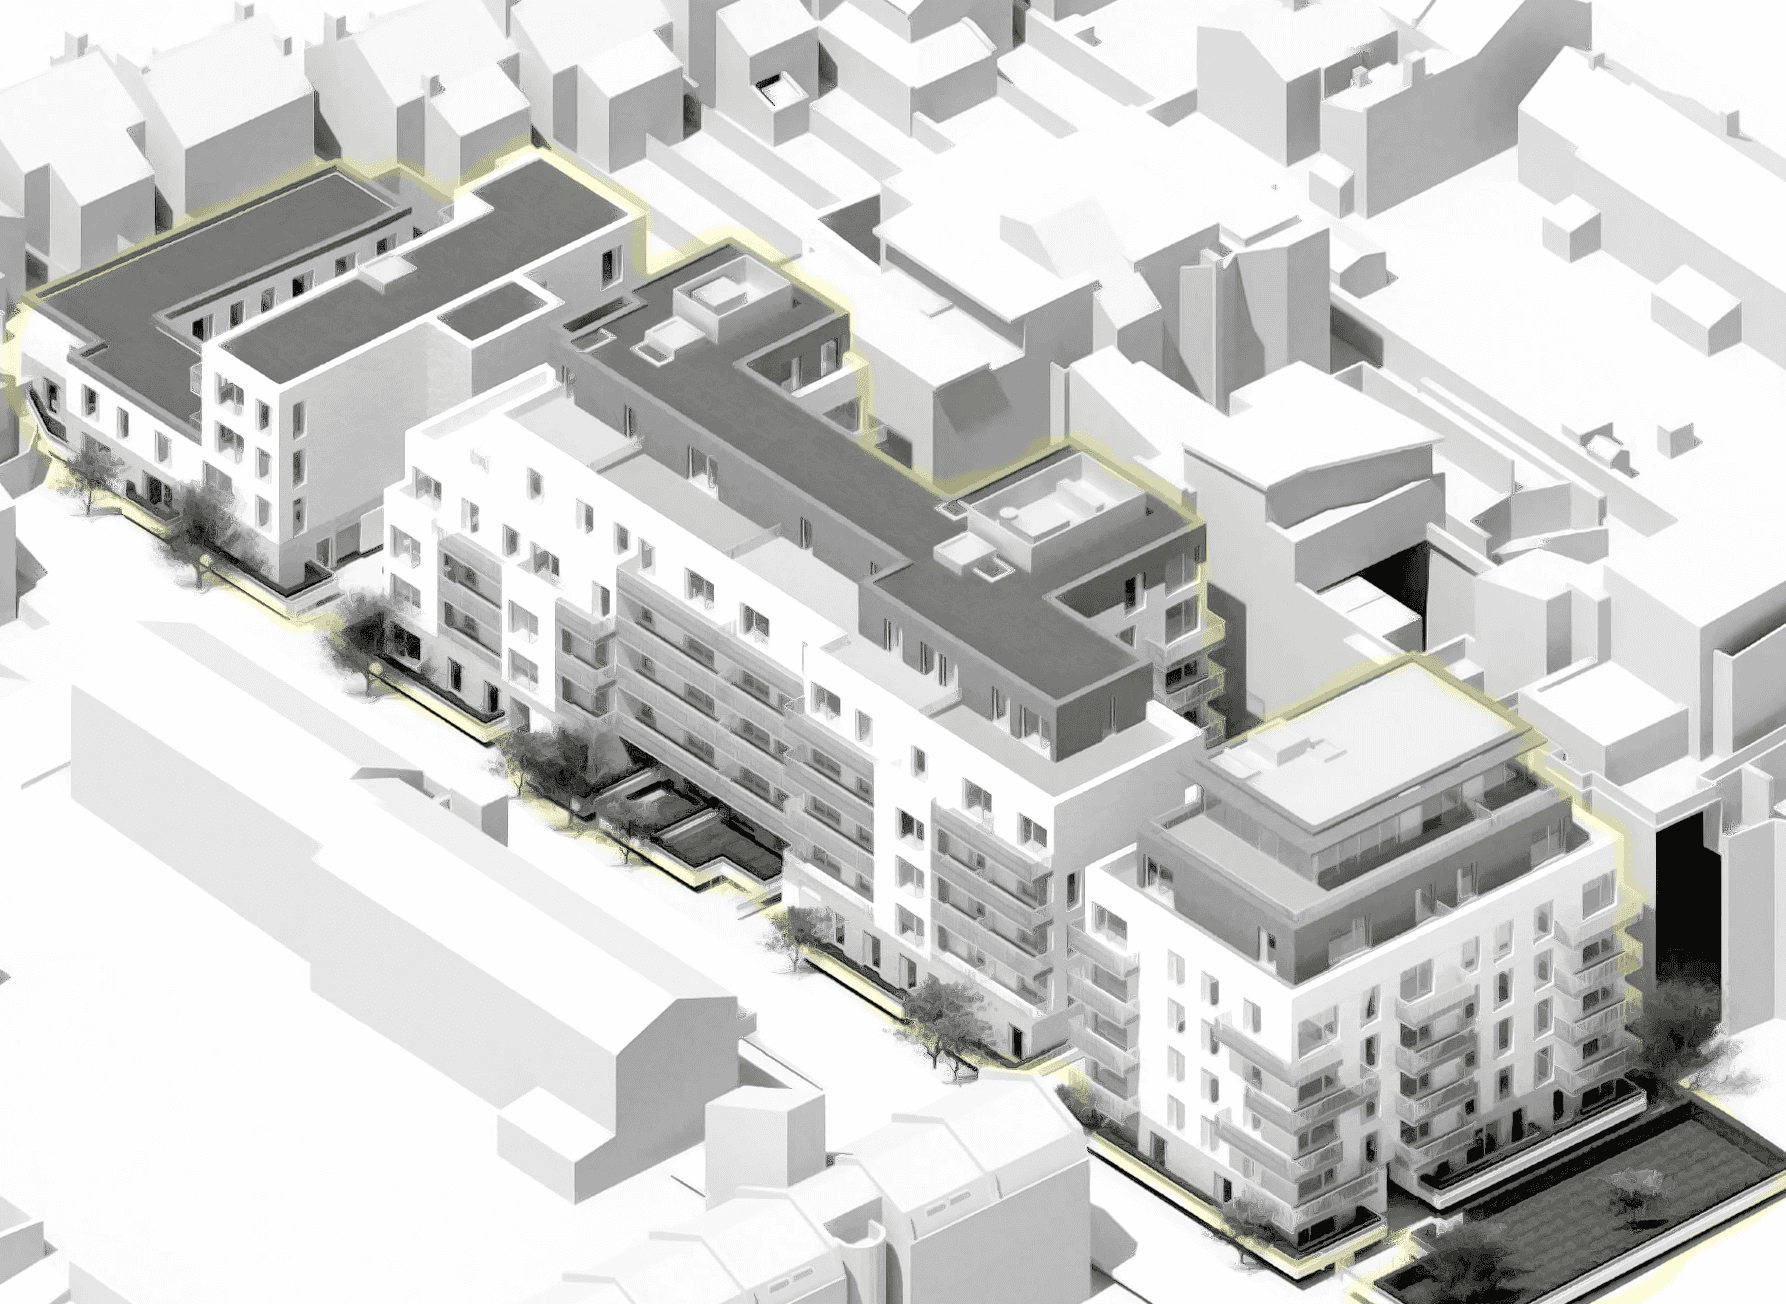 Final Major Project - To redevelop and regenerate a chosen housing site, in this project I aimed to:
- OPTIMISING SITE TO GIVE PURPOSE TO AMENITY SPACES
- A BUILDING THAT IMPROVES THE CONTEXT AND ITS HERITAGE VISUALLY AND FUNCTIONALLY
- A UNIFYING DESIGN APPROACH
- TO TIE THE BLOCKS TOGETHER
- A GREEN LANDSCAPE BUFFER TO SOFTEN EACH BLOCKS EDGES
- A CONNECTED APPROACH TO THE NEIGHBOURHOOD
- MAXIMISING NATURAL LIGHT INTO HOMES
- OFFERING AFFORDABLE AND AESTHETIC EXPERIENCE
- PROVIDE A SENSUOUS AND PLAYFUL ENVIRONMENT, FULL OF CONTINUOUS CHANGING
- LIGHT, SHADOWS AND TEXTURES